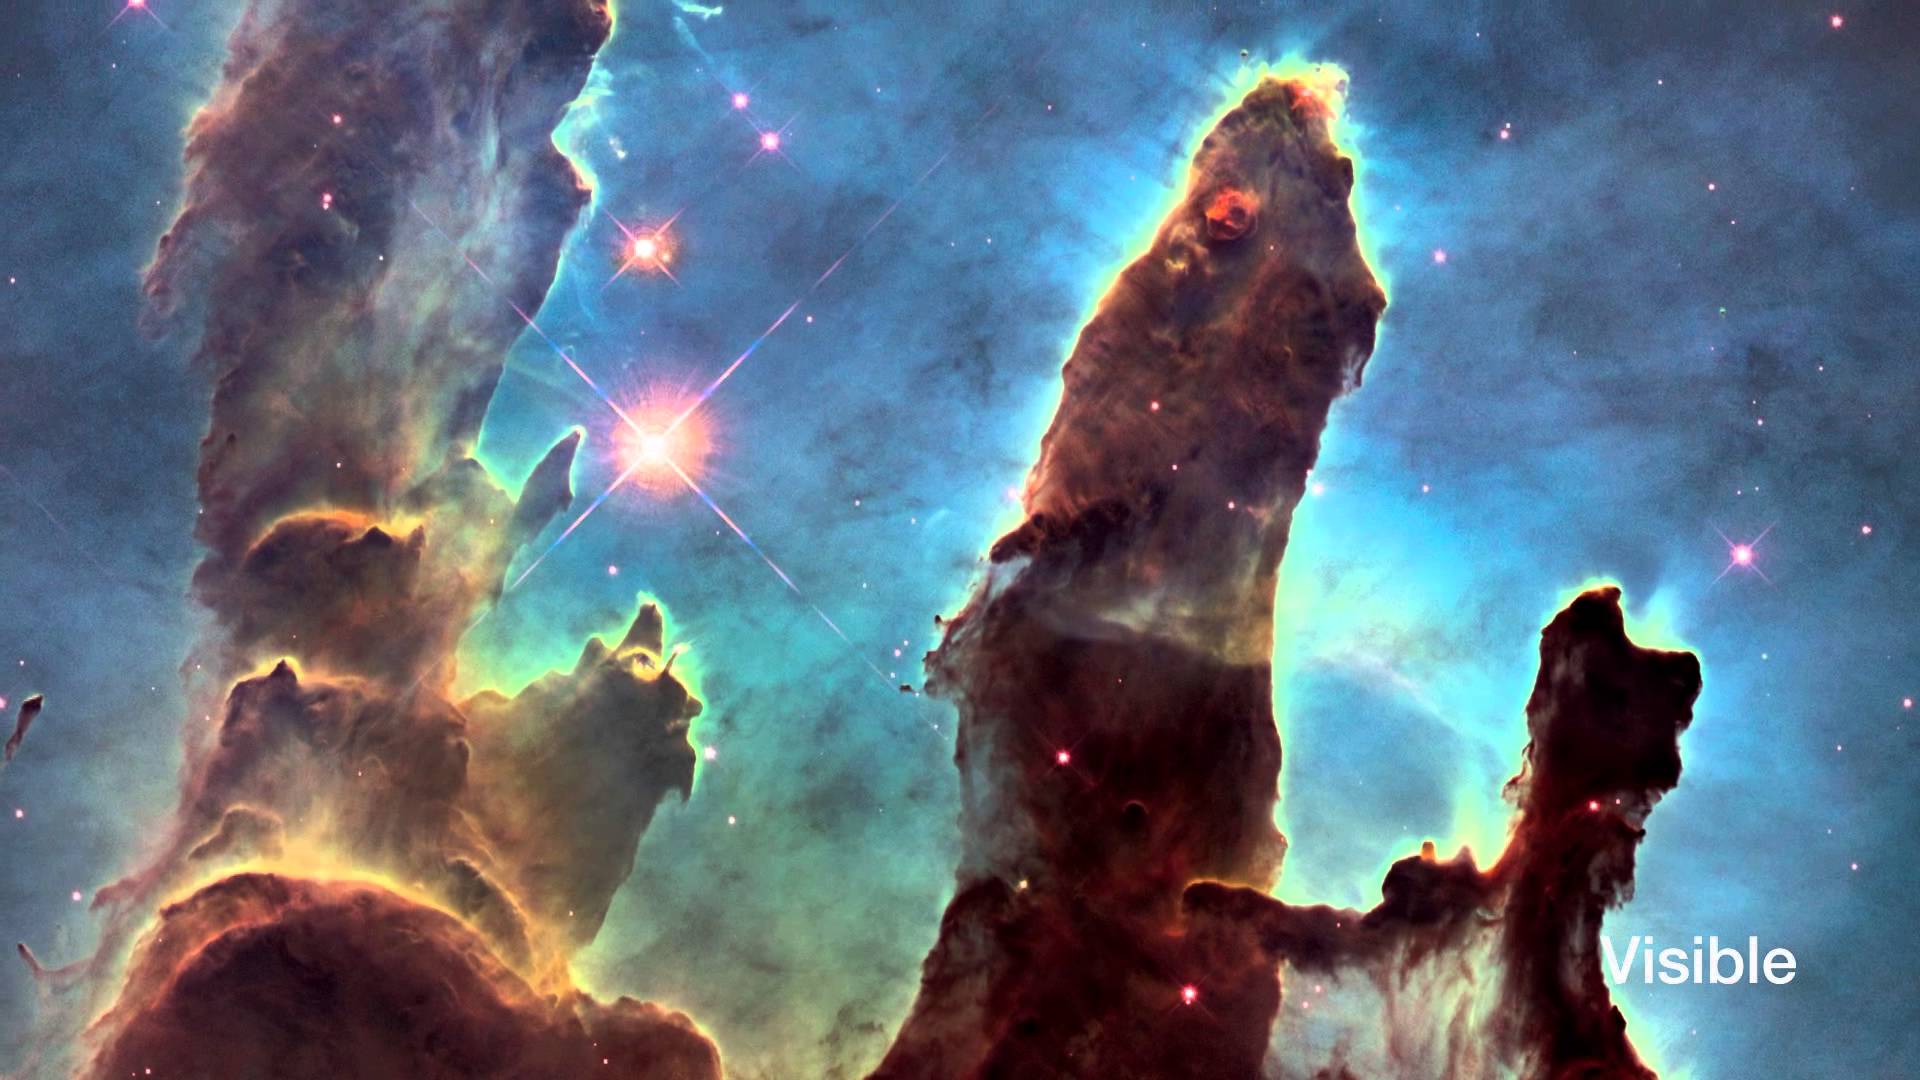 Hubblecast 82: New view of the Pillars of Creation